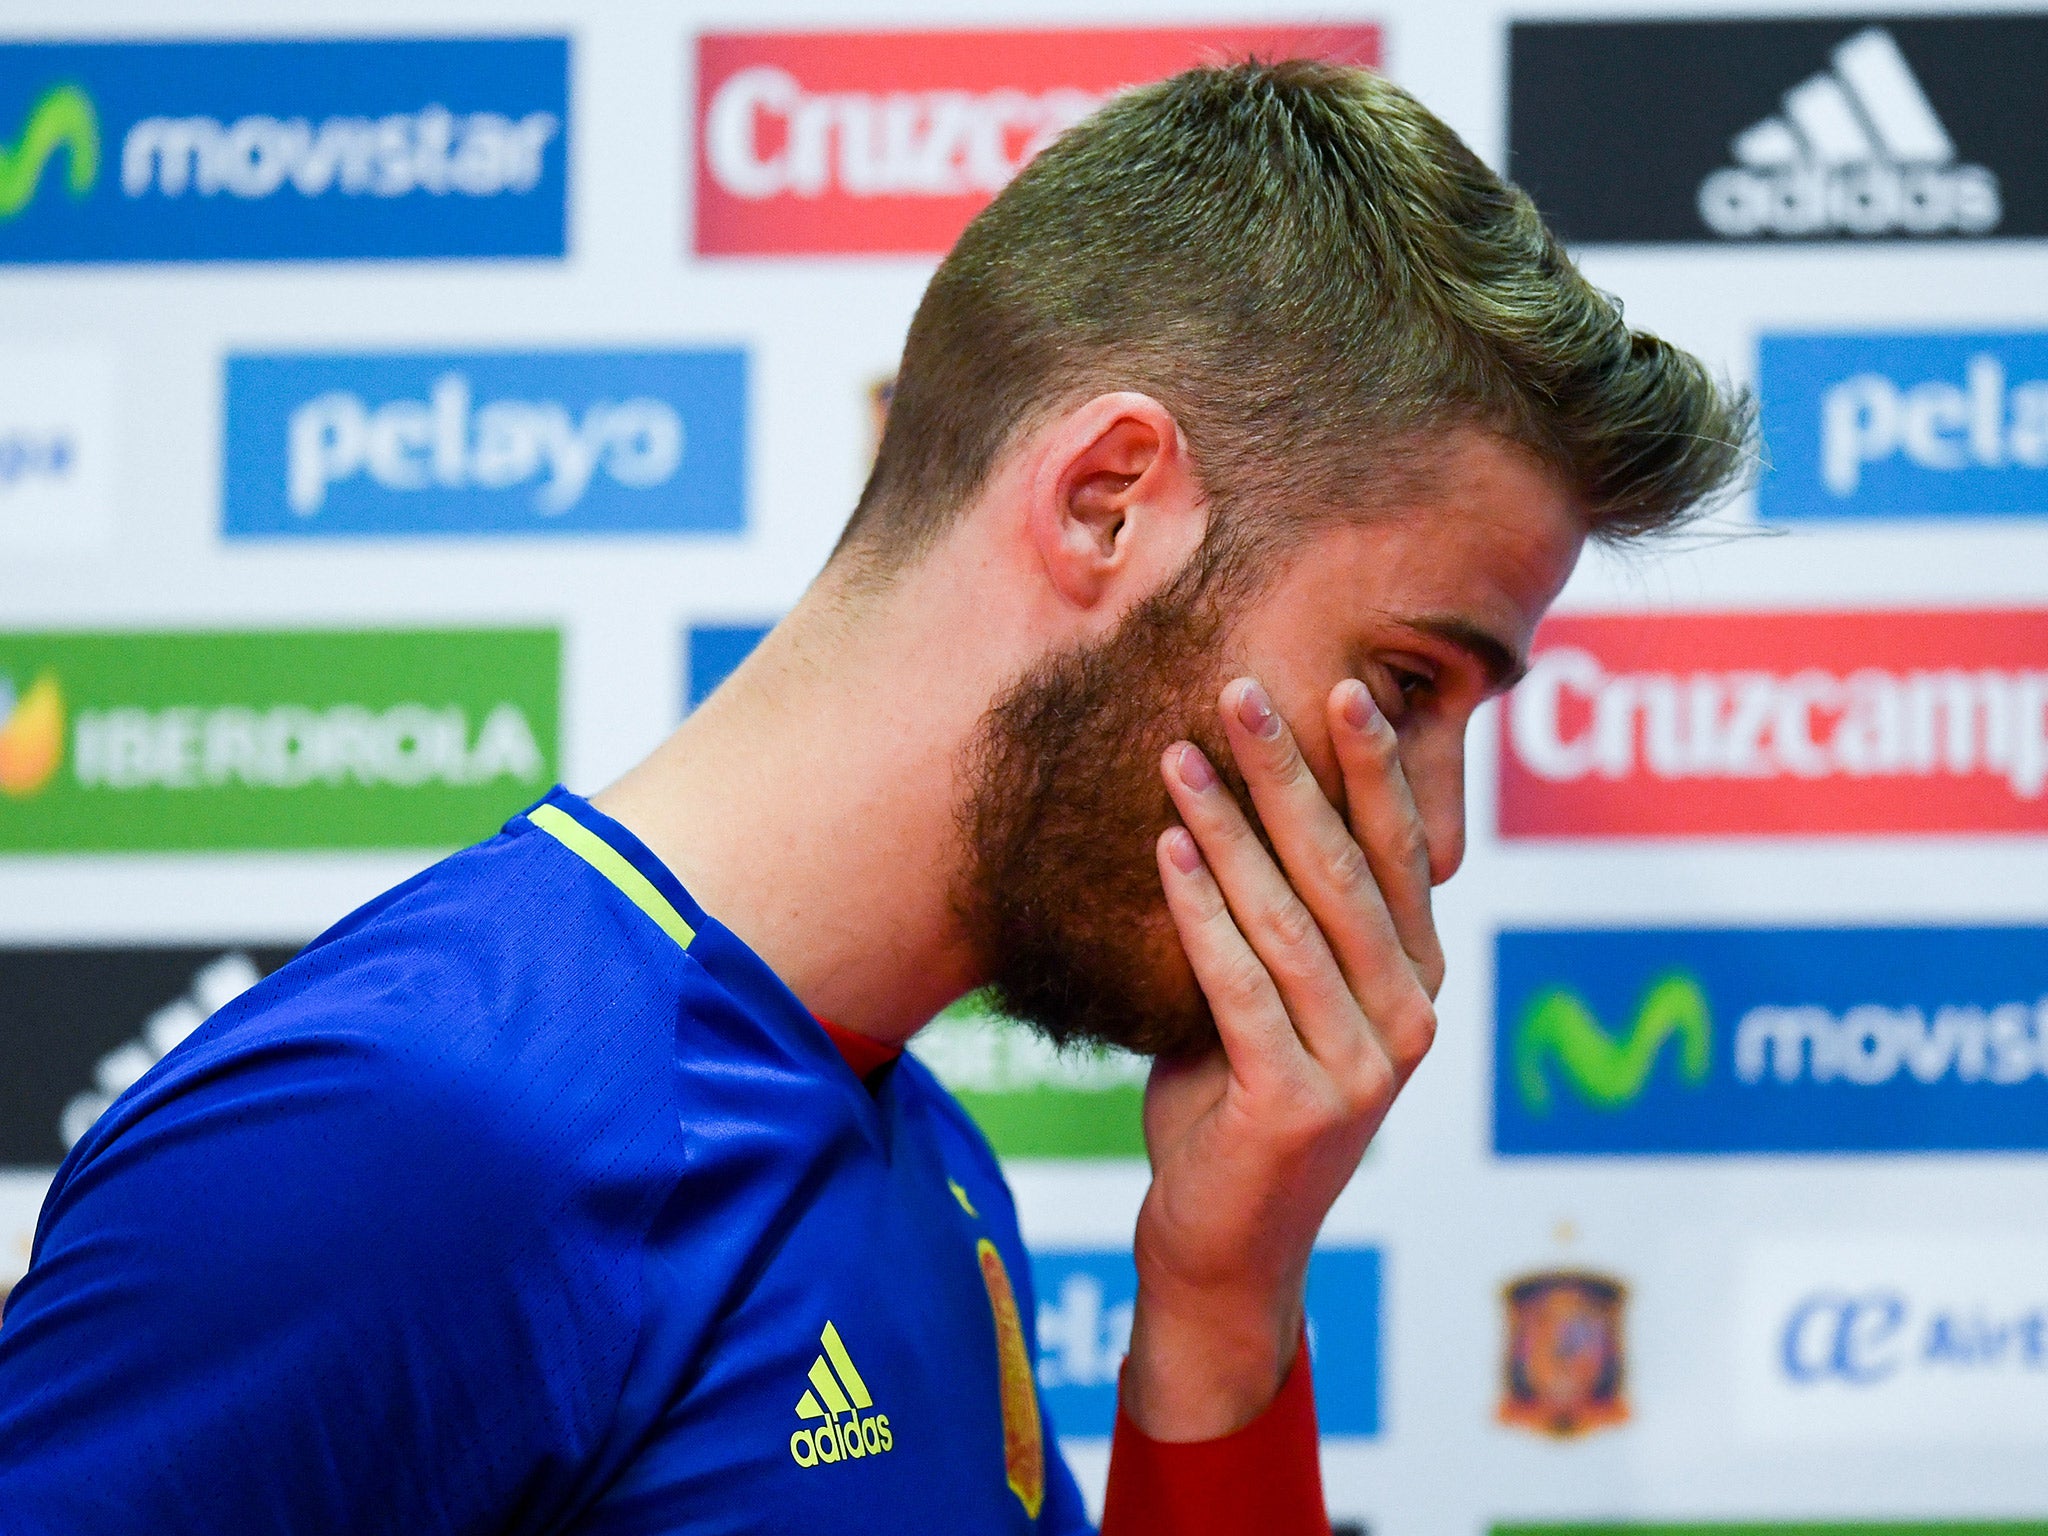 David De Gea spoke at a press conference to deny all allegations made against him in a Spanish court case